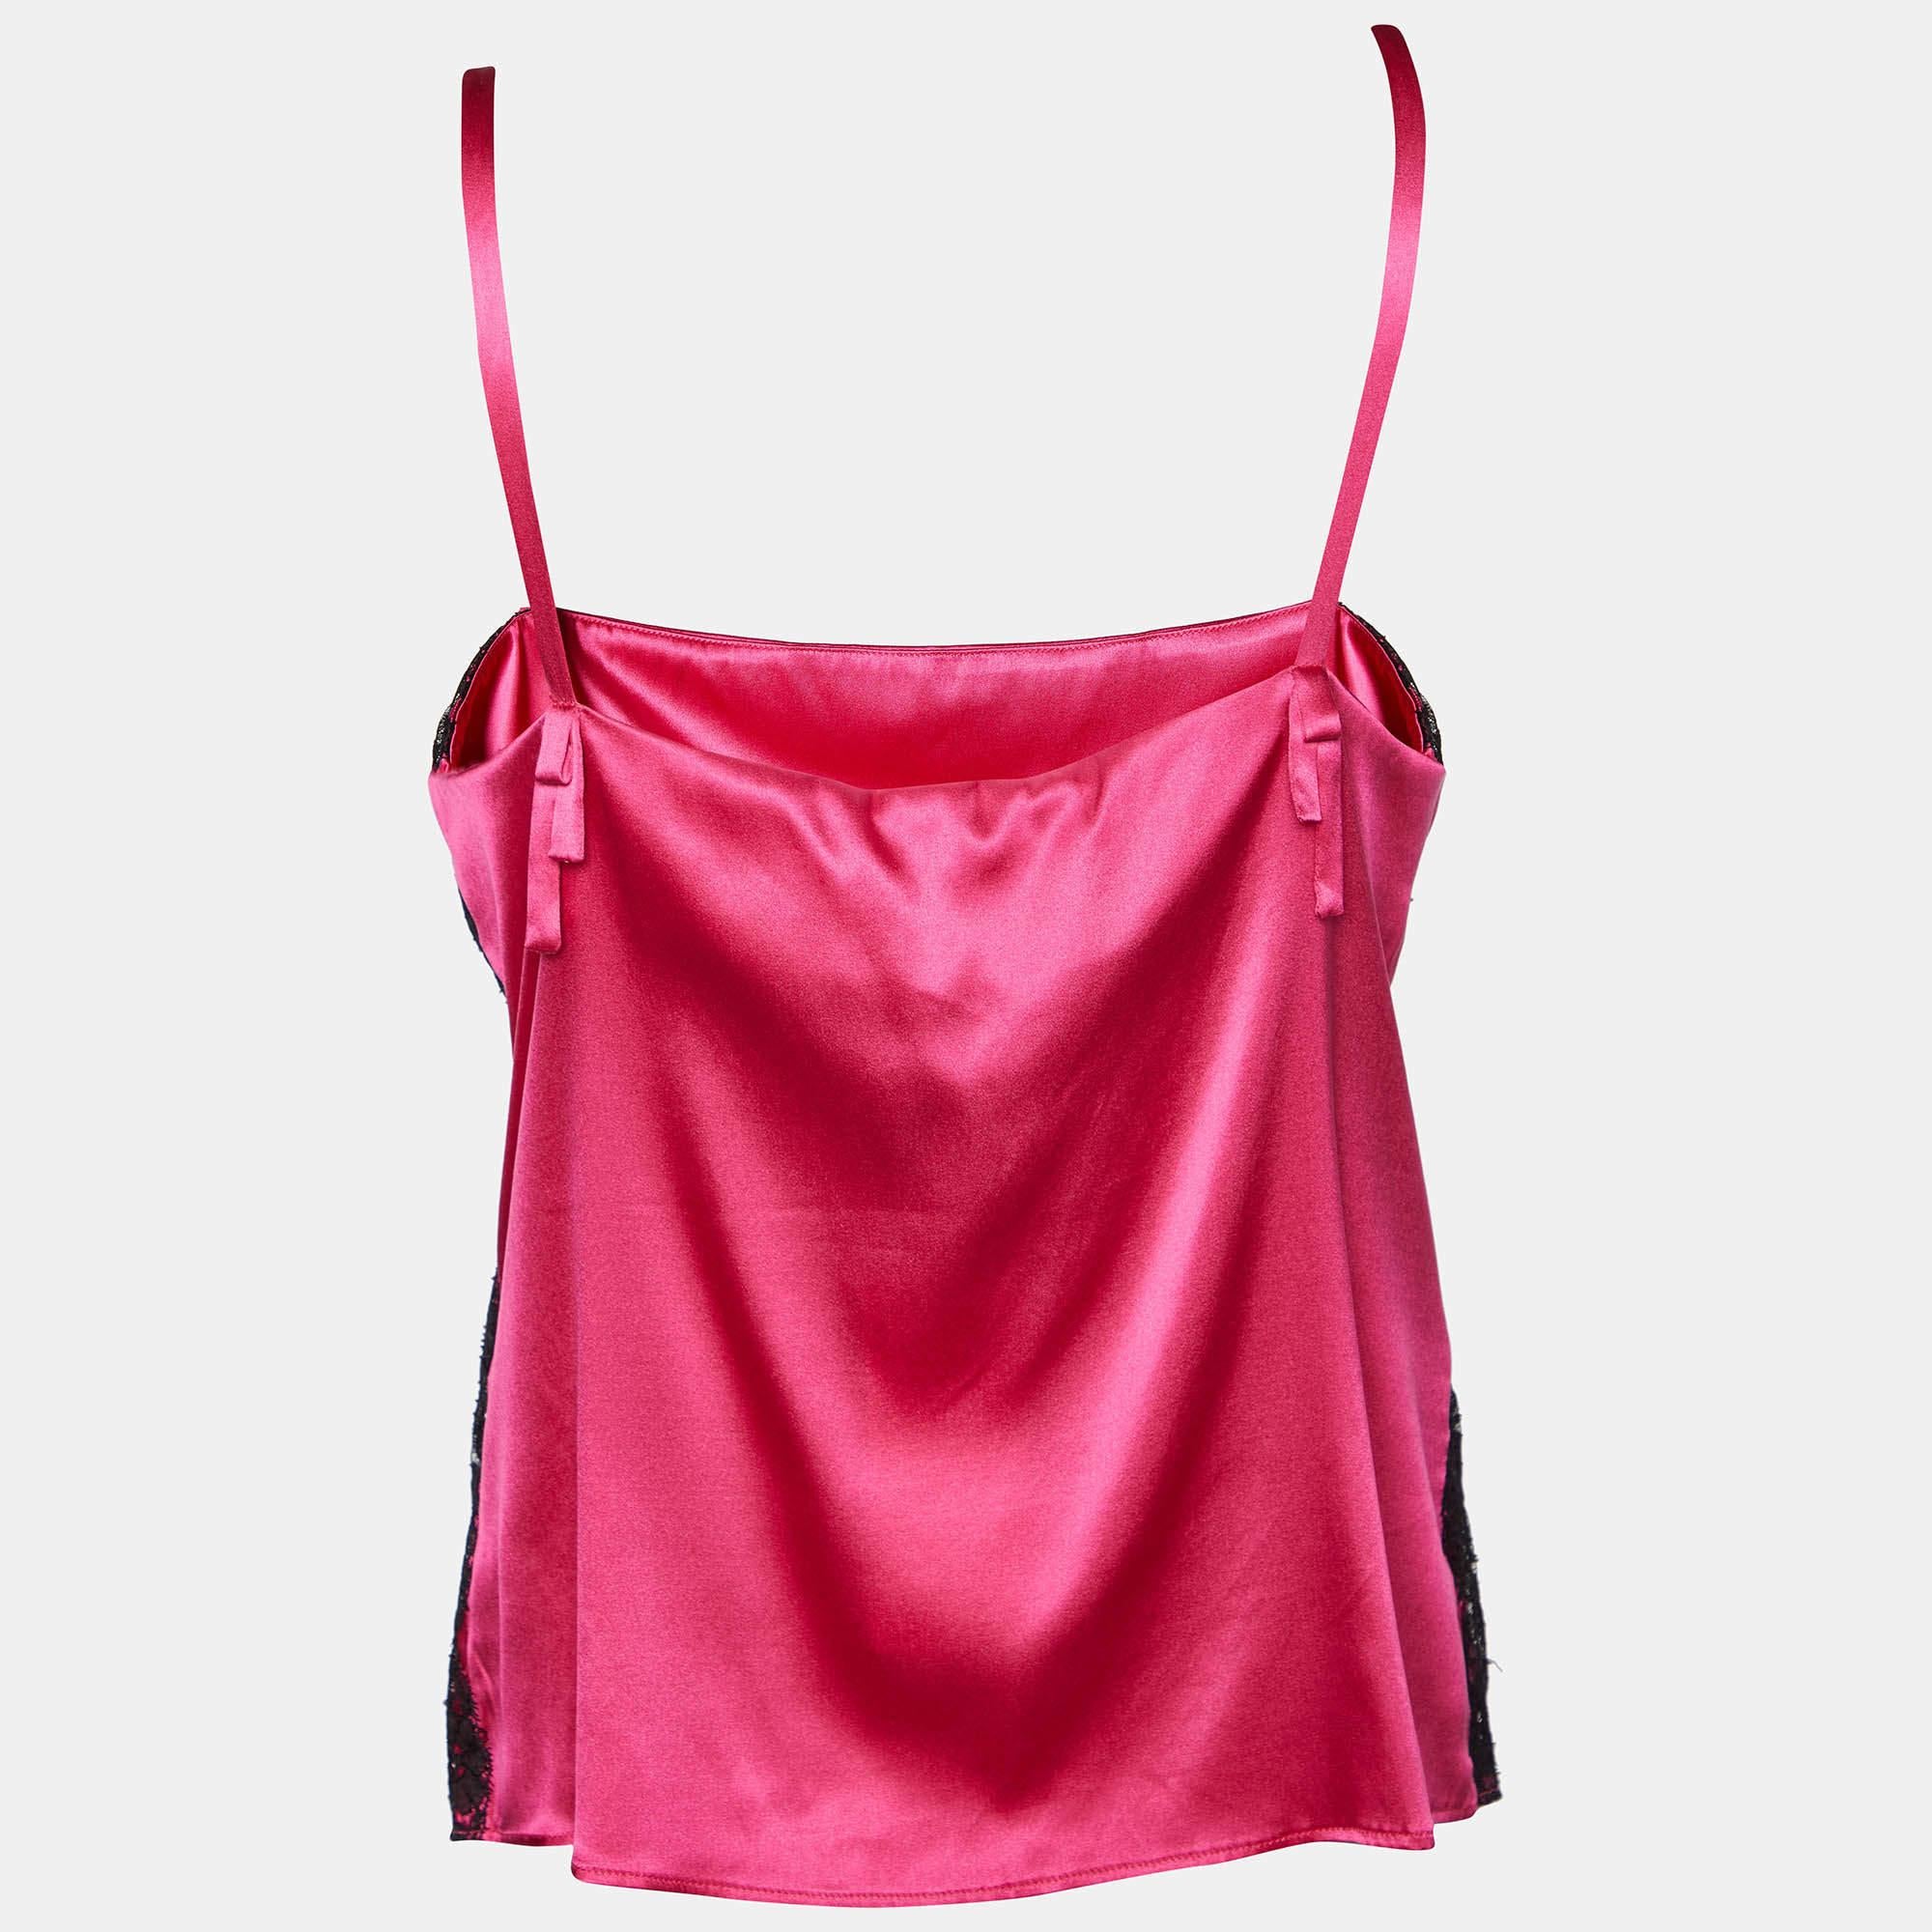 The D&G camisole is an exquisite lingerie piece featuring vibrant fuschia pink silk satin with delicate lace detailing. Its elegant design offers a sensuous and luxurious feel, making it a perfect choice for intimate occasions.

